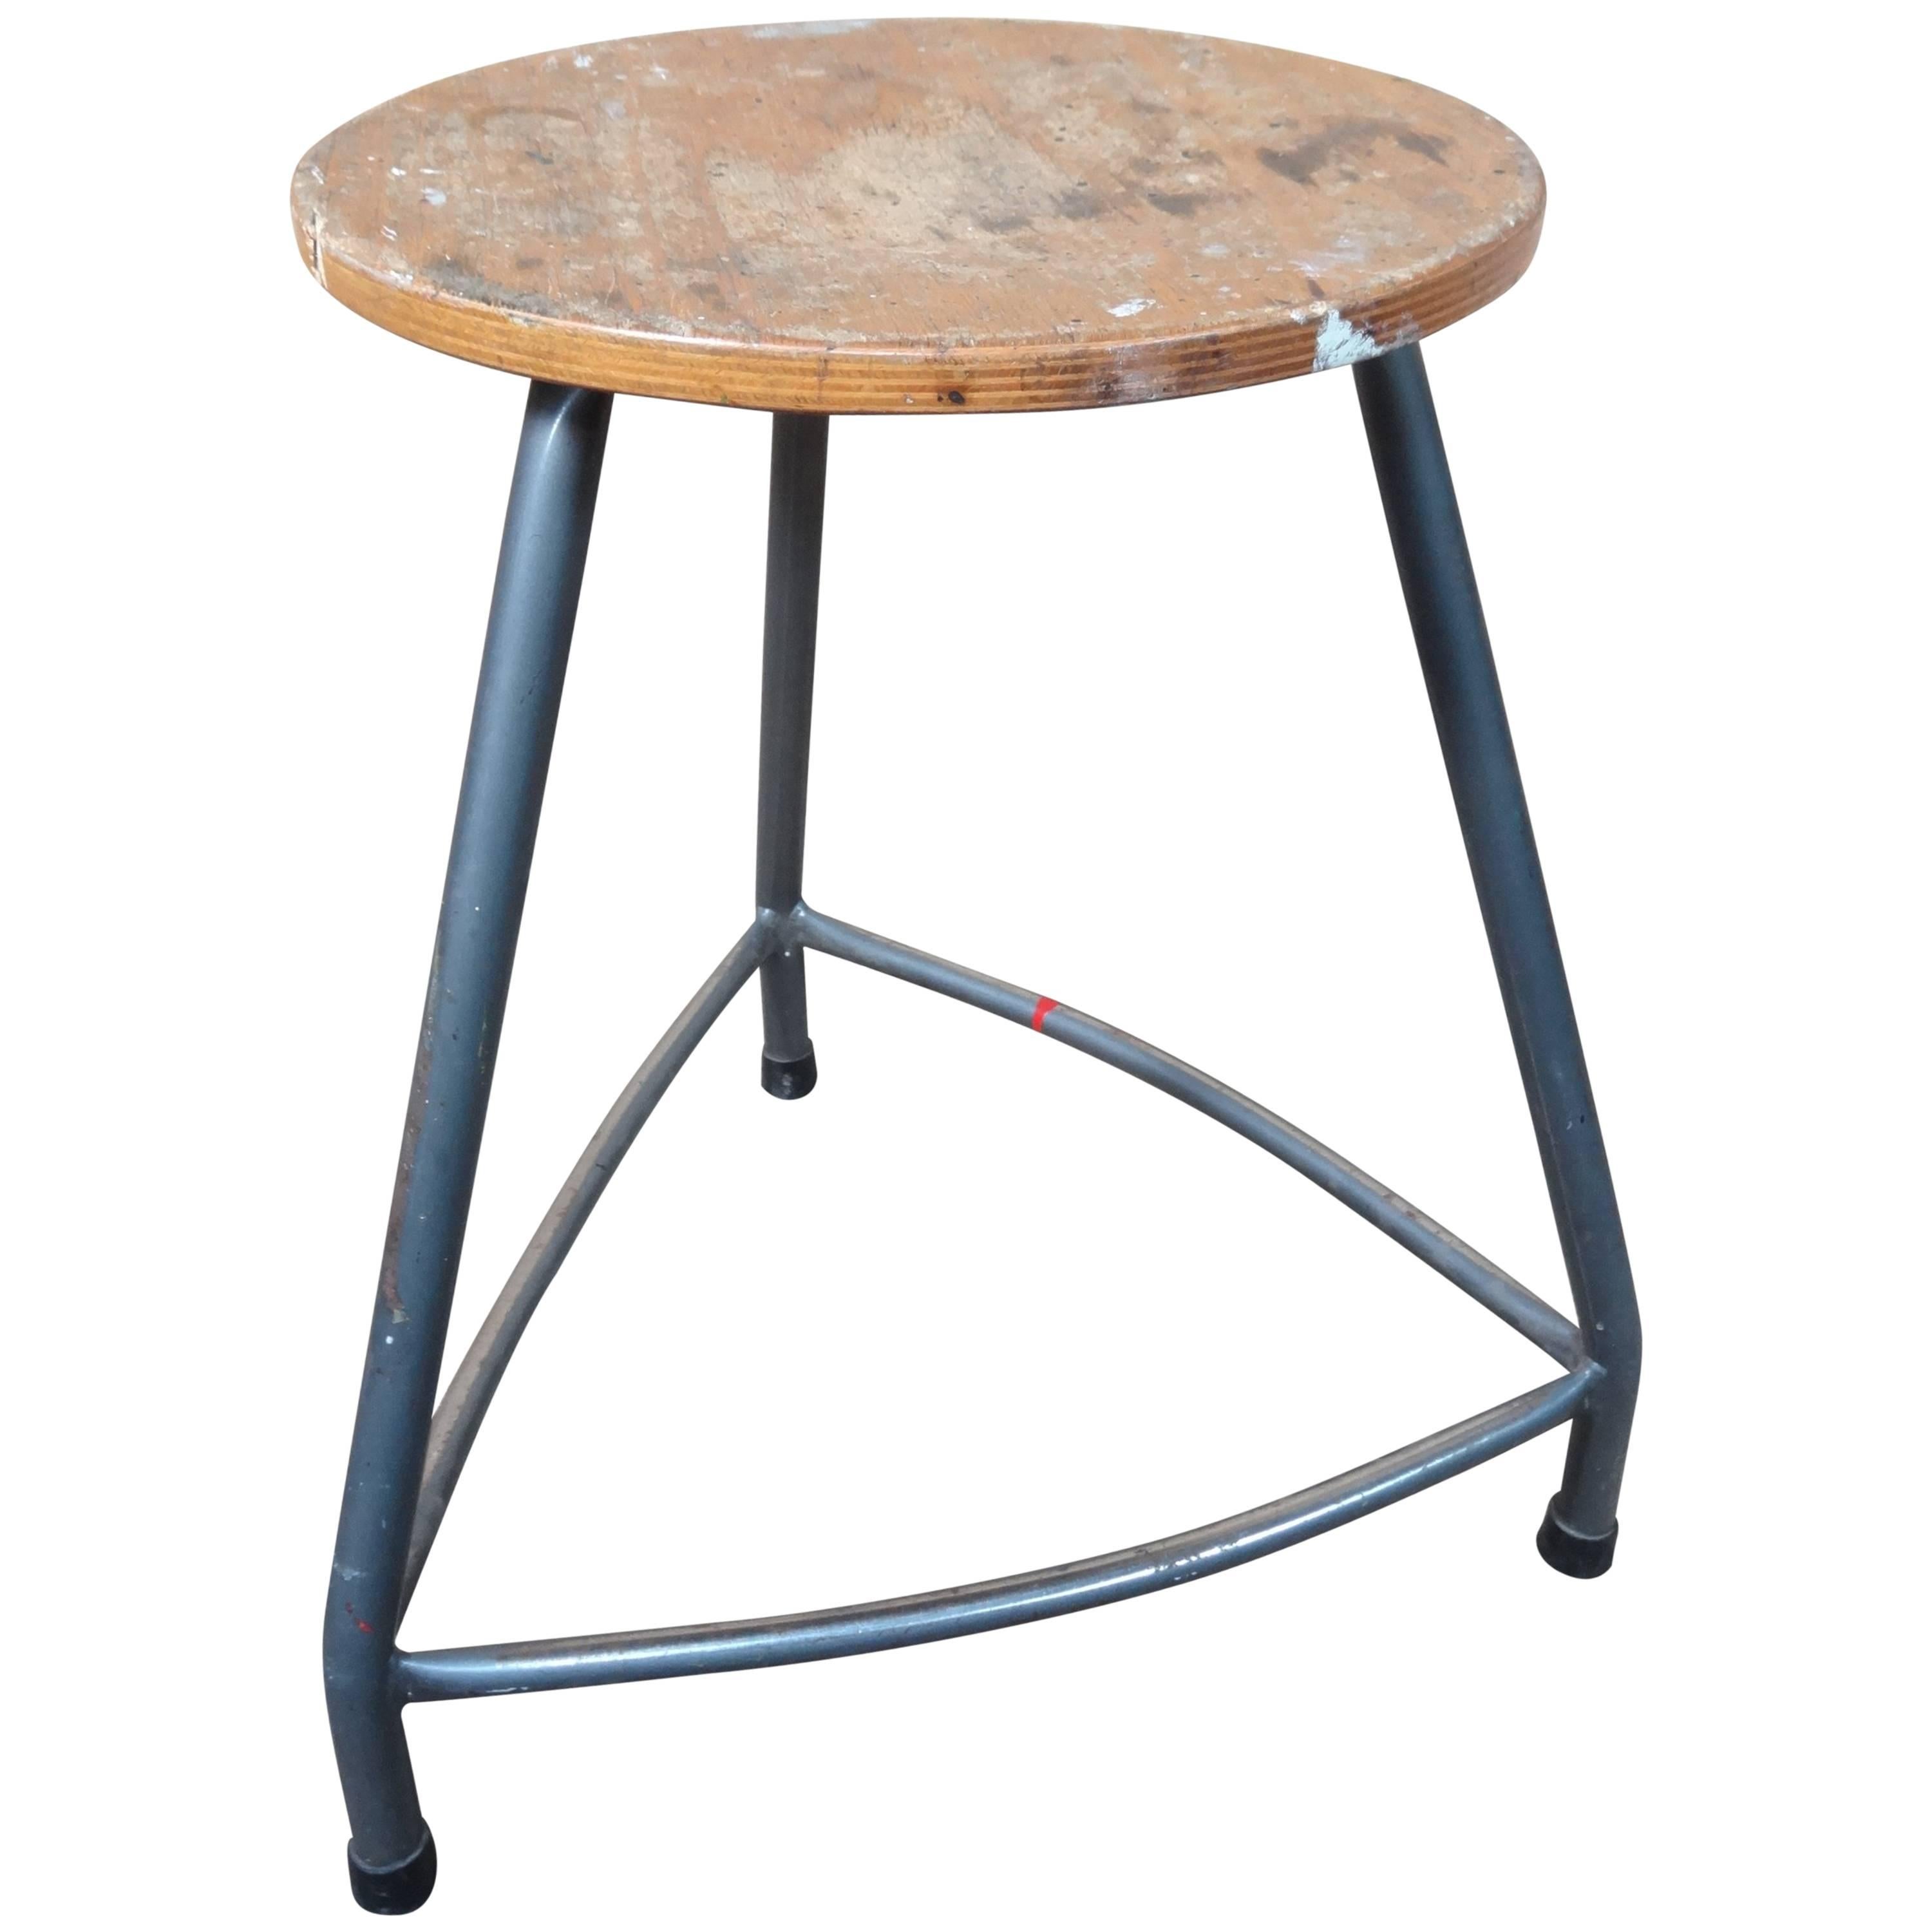 Original 1960s retro vintage French Painters Stool For Sale